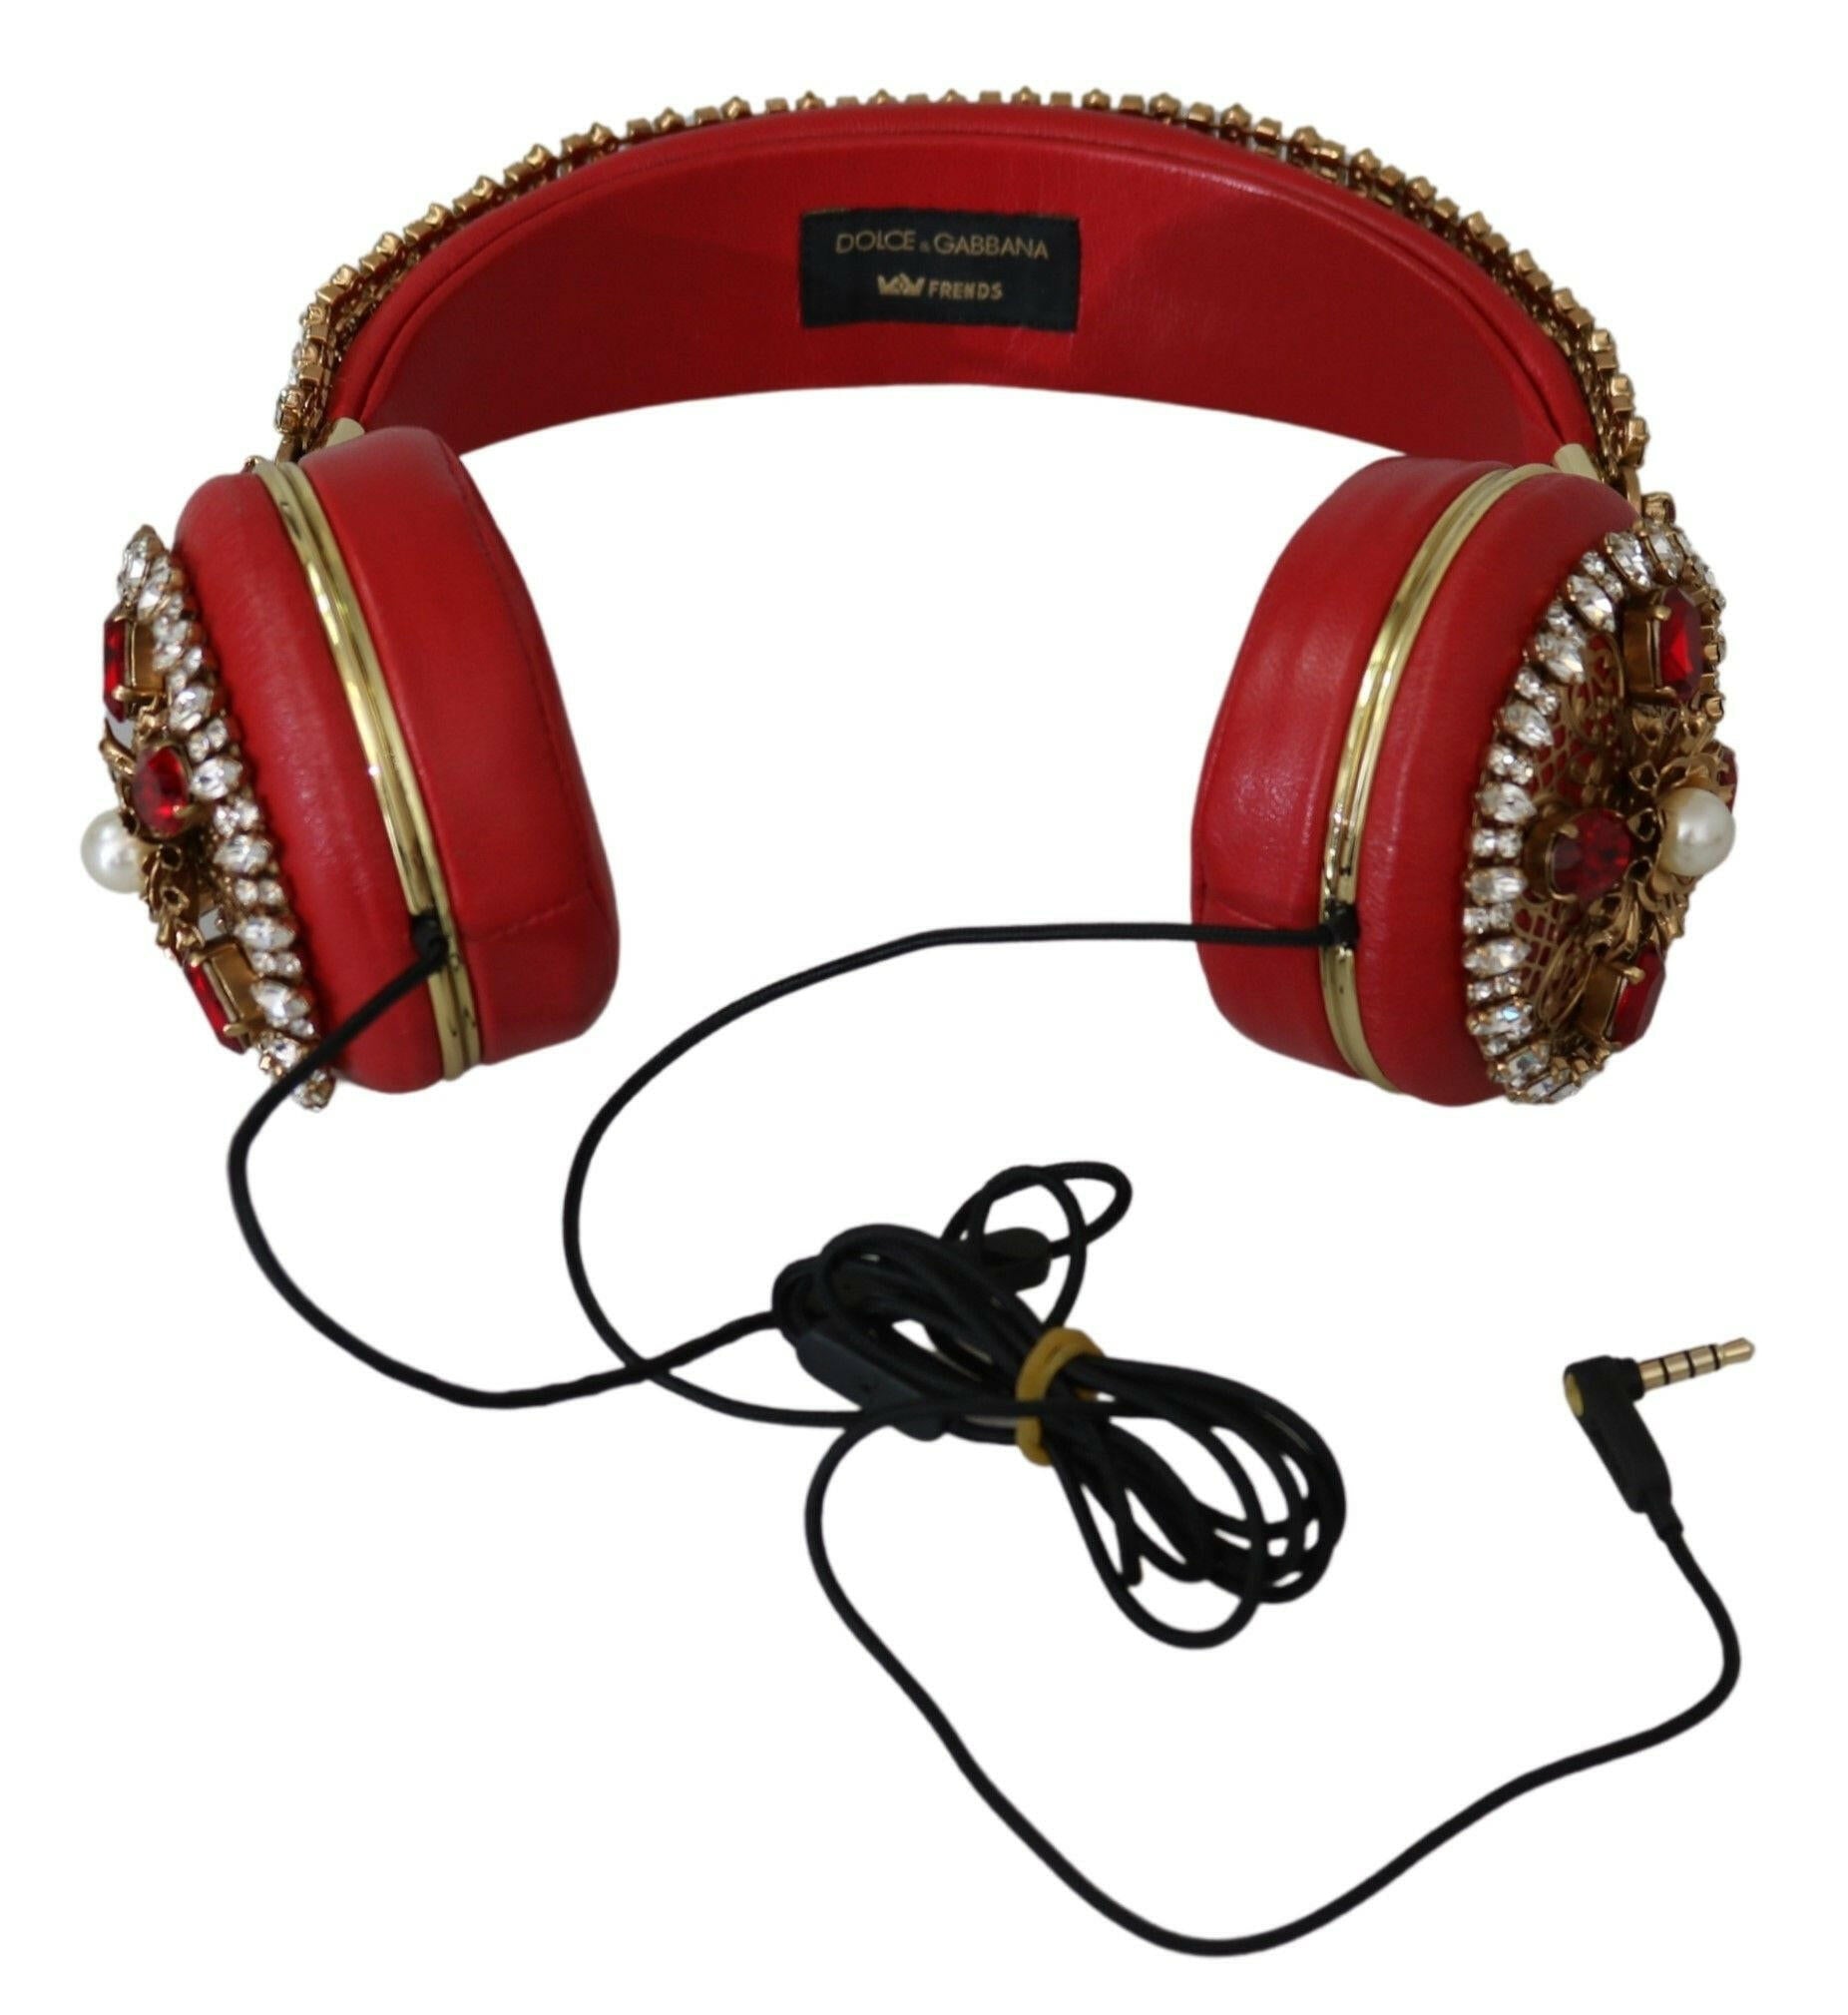 Dolce & Gabbana FRENDS Leather Red Floral Crystal Headset Headphones - GENUINE AUTHENTIC BRAND LLC  